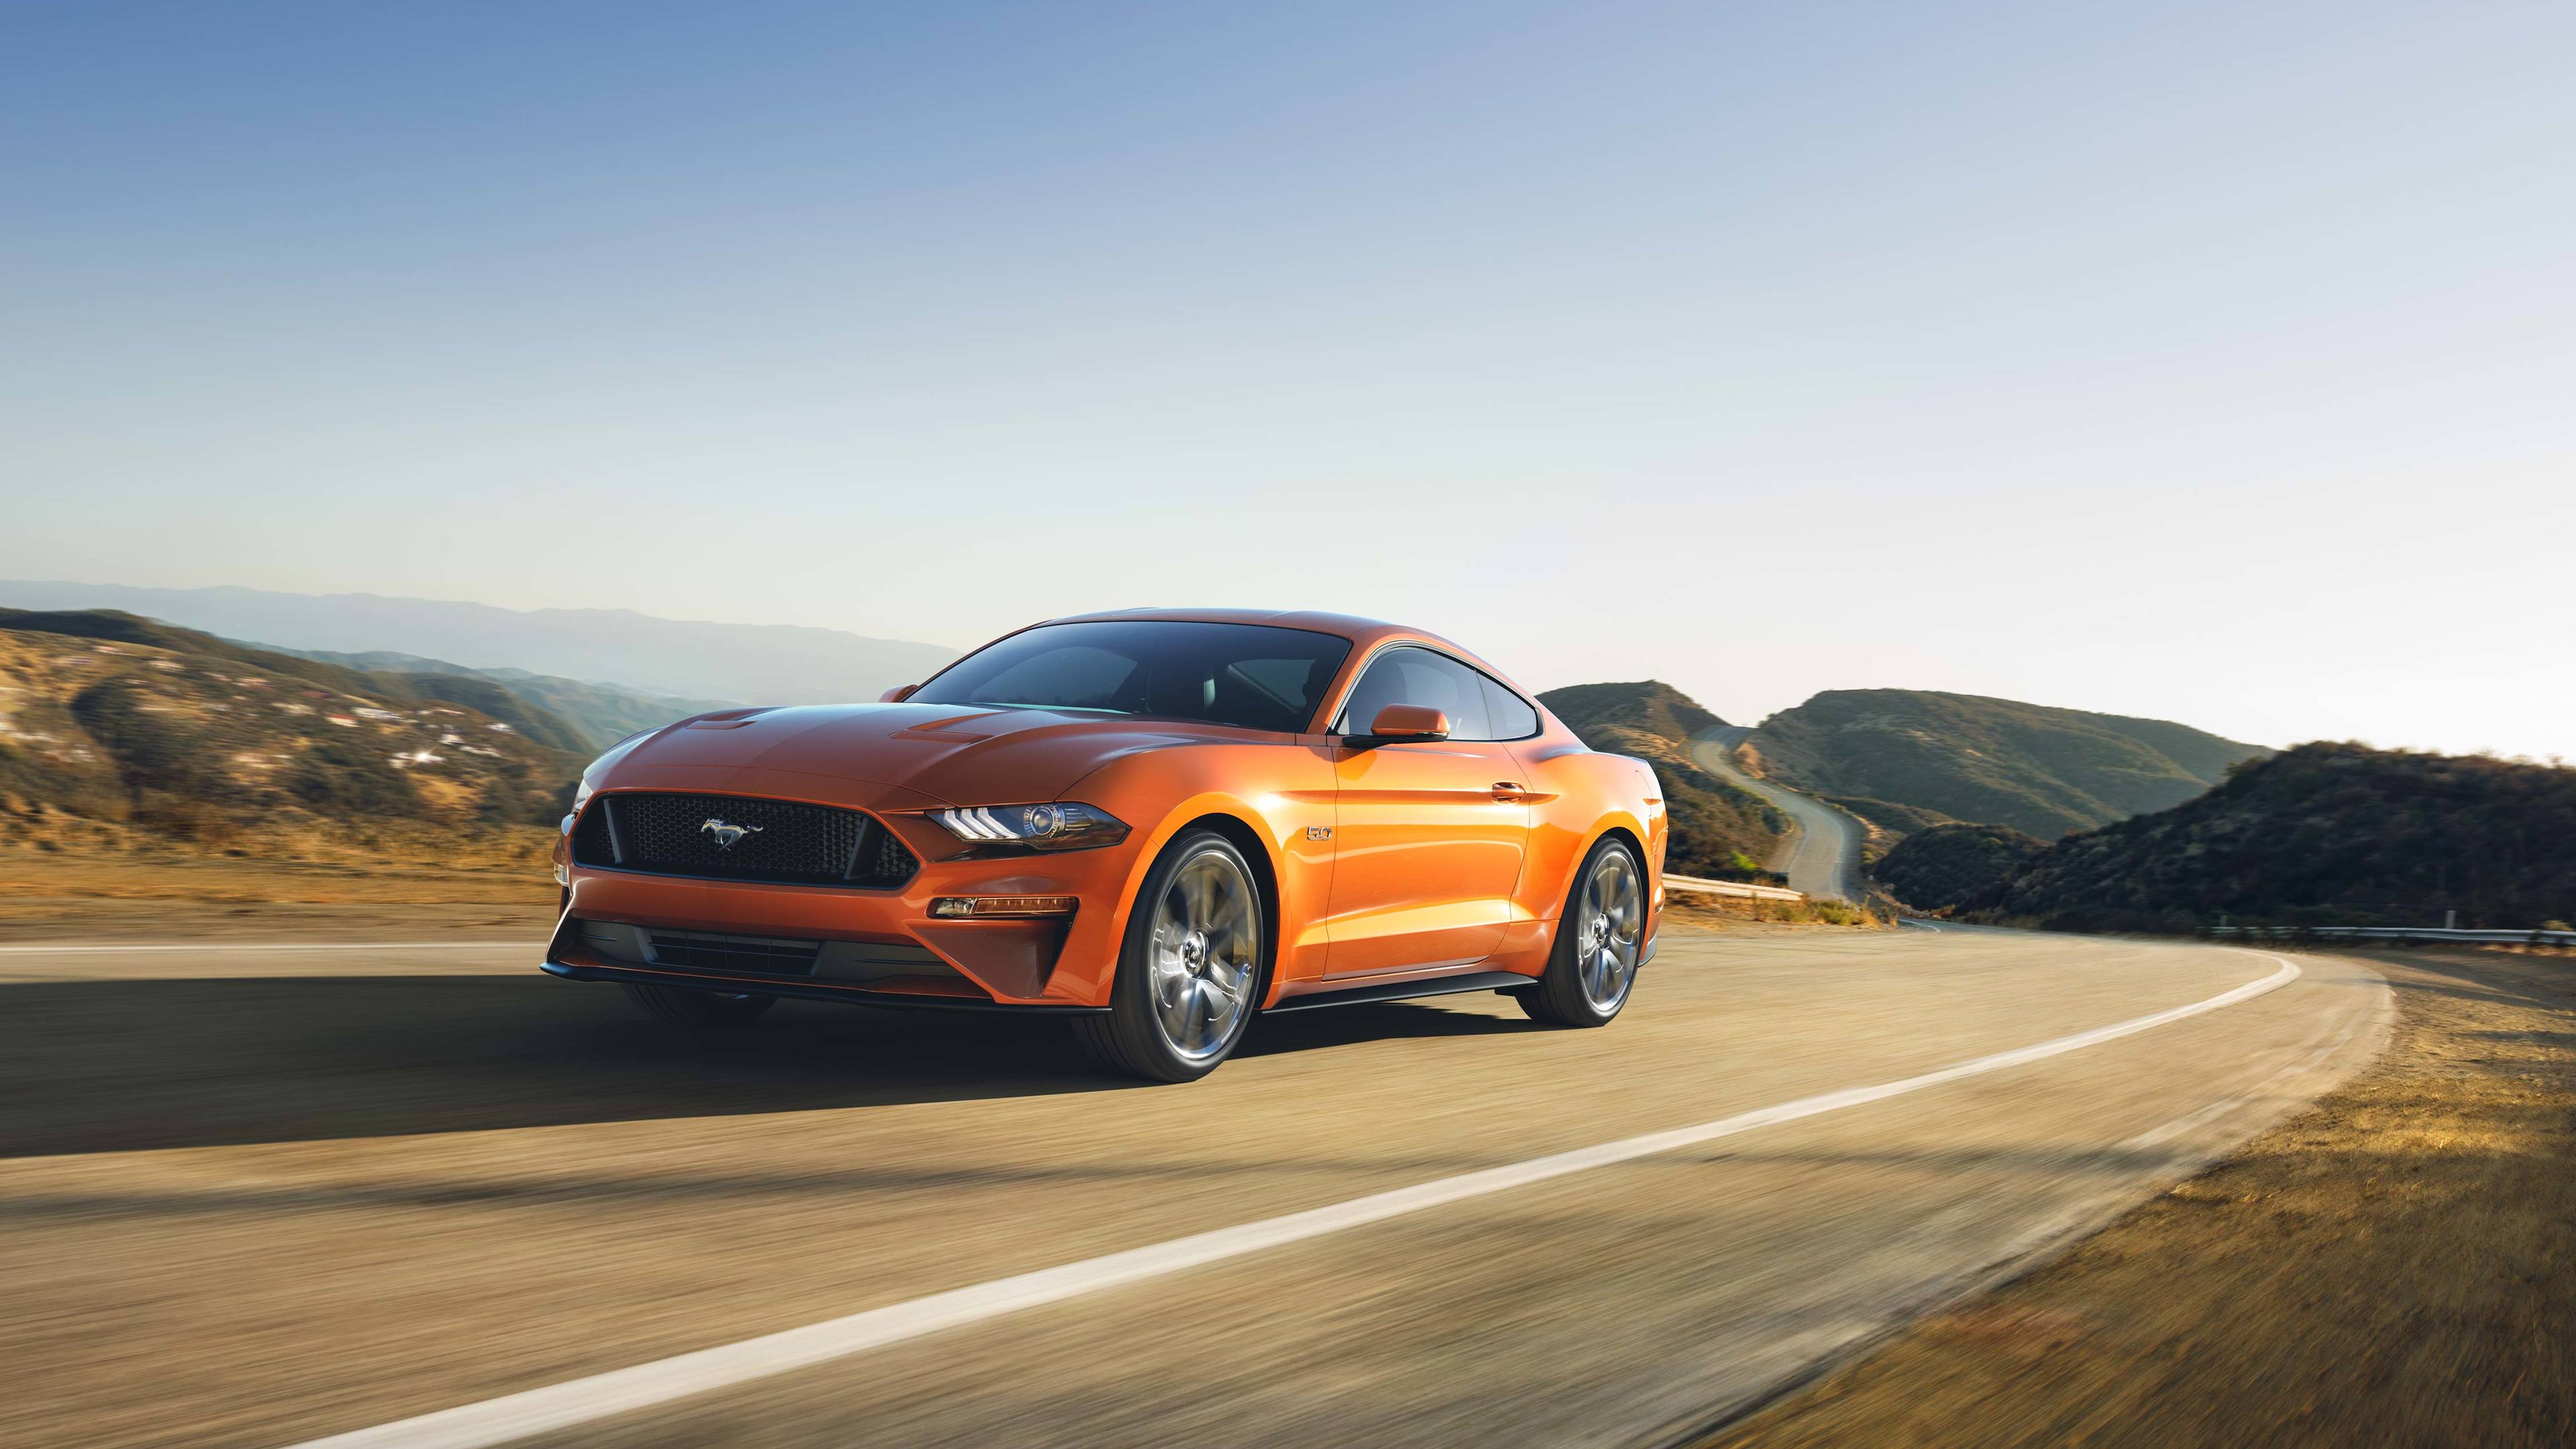 ford mustang gt 2018 4k 1539104941 - Ford Mustang GT 2018 4k - hd-wallpapers, ford mustang wallpapers, cars wallpapers, 4k-wallpapers, 2018 cars wallpapers